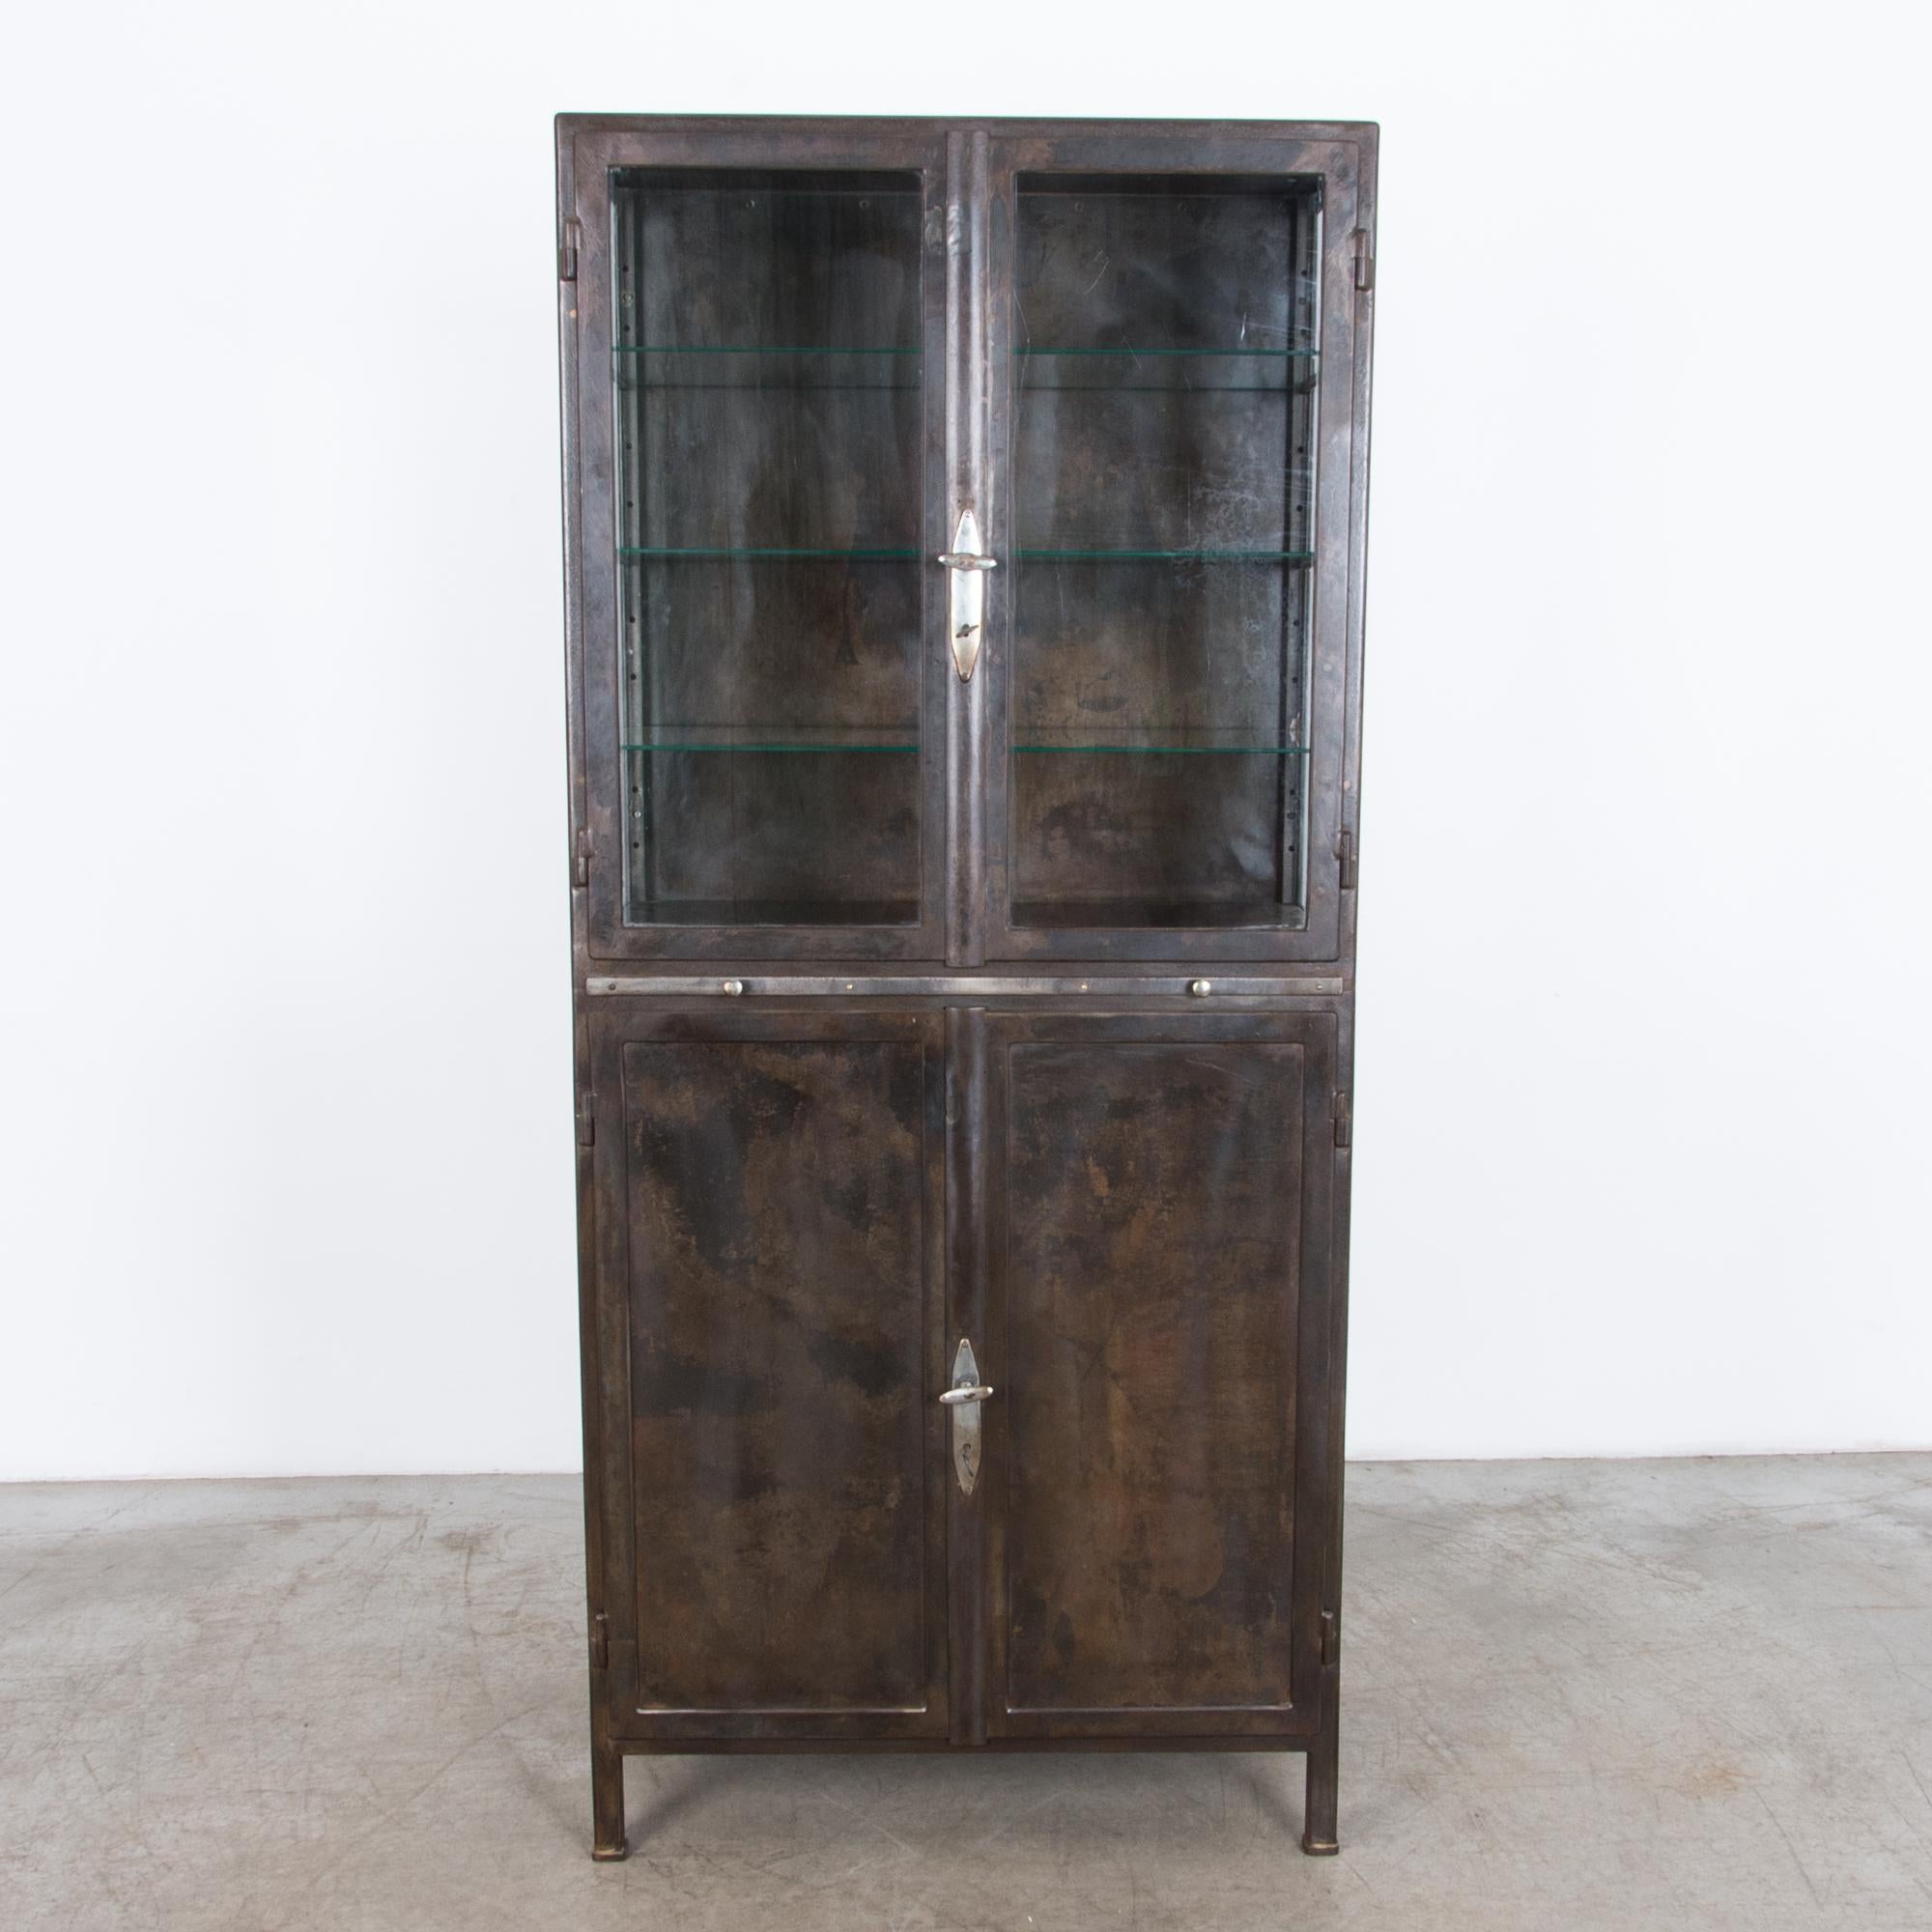 A four door metal vitrine with pull-out shelf, from Czech Republic circa 1930. This polished steel cabinet was originally designed for industrial use, it features durable locking hardware and purpose built steel construction. The glass interior